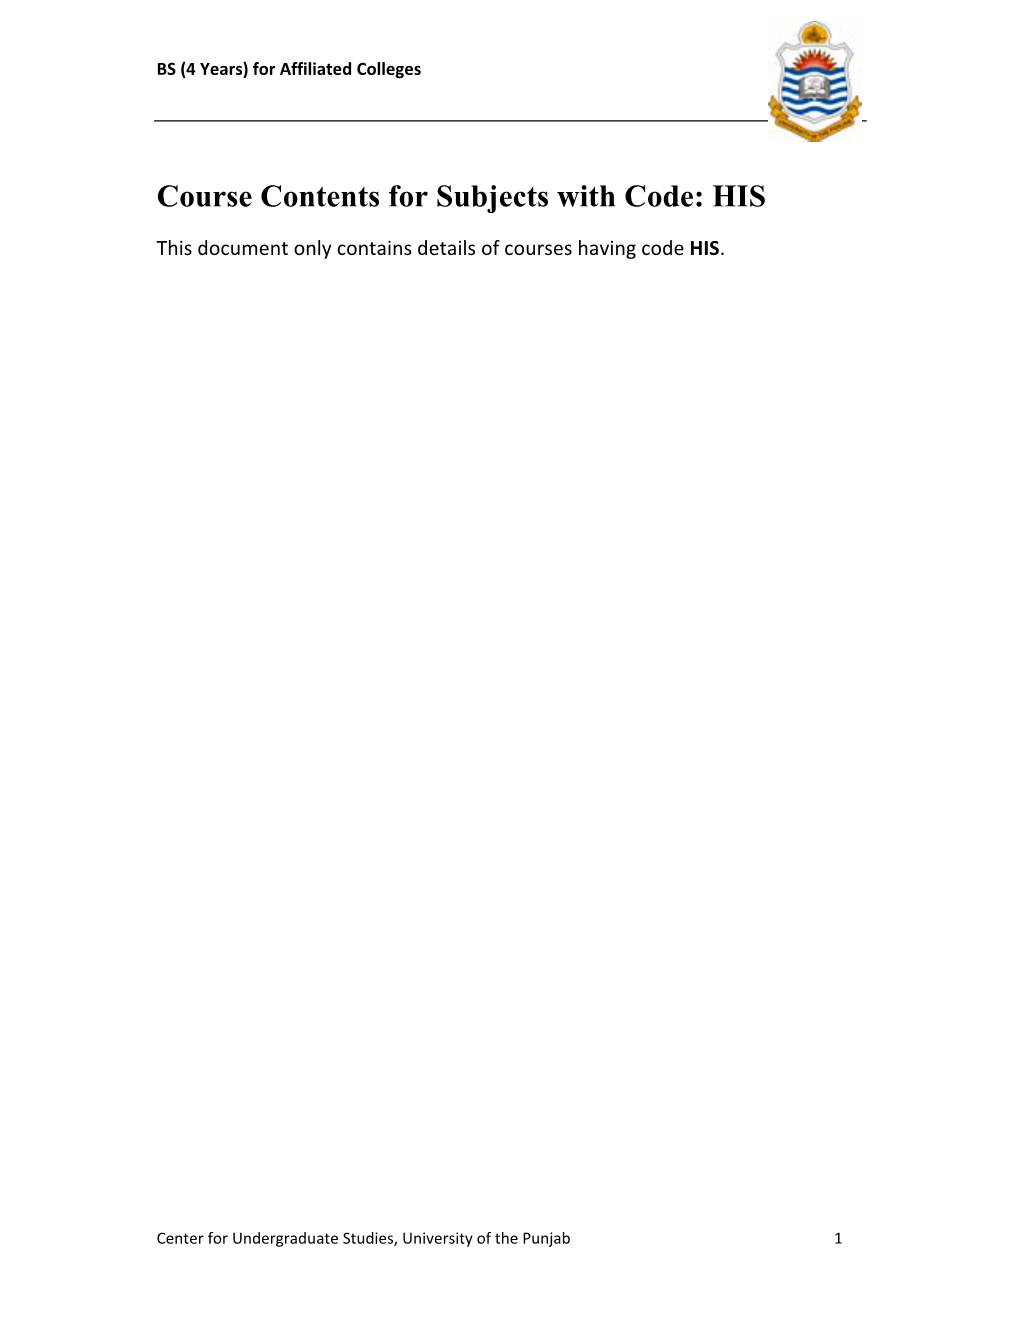 Course Contents for Subjects with Code: HIS